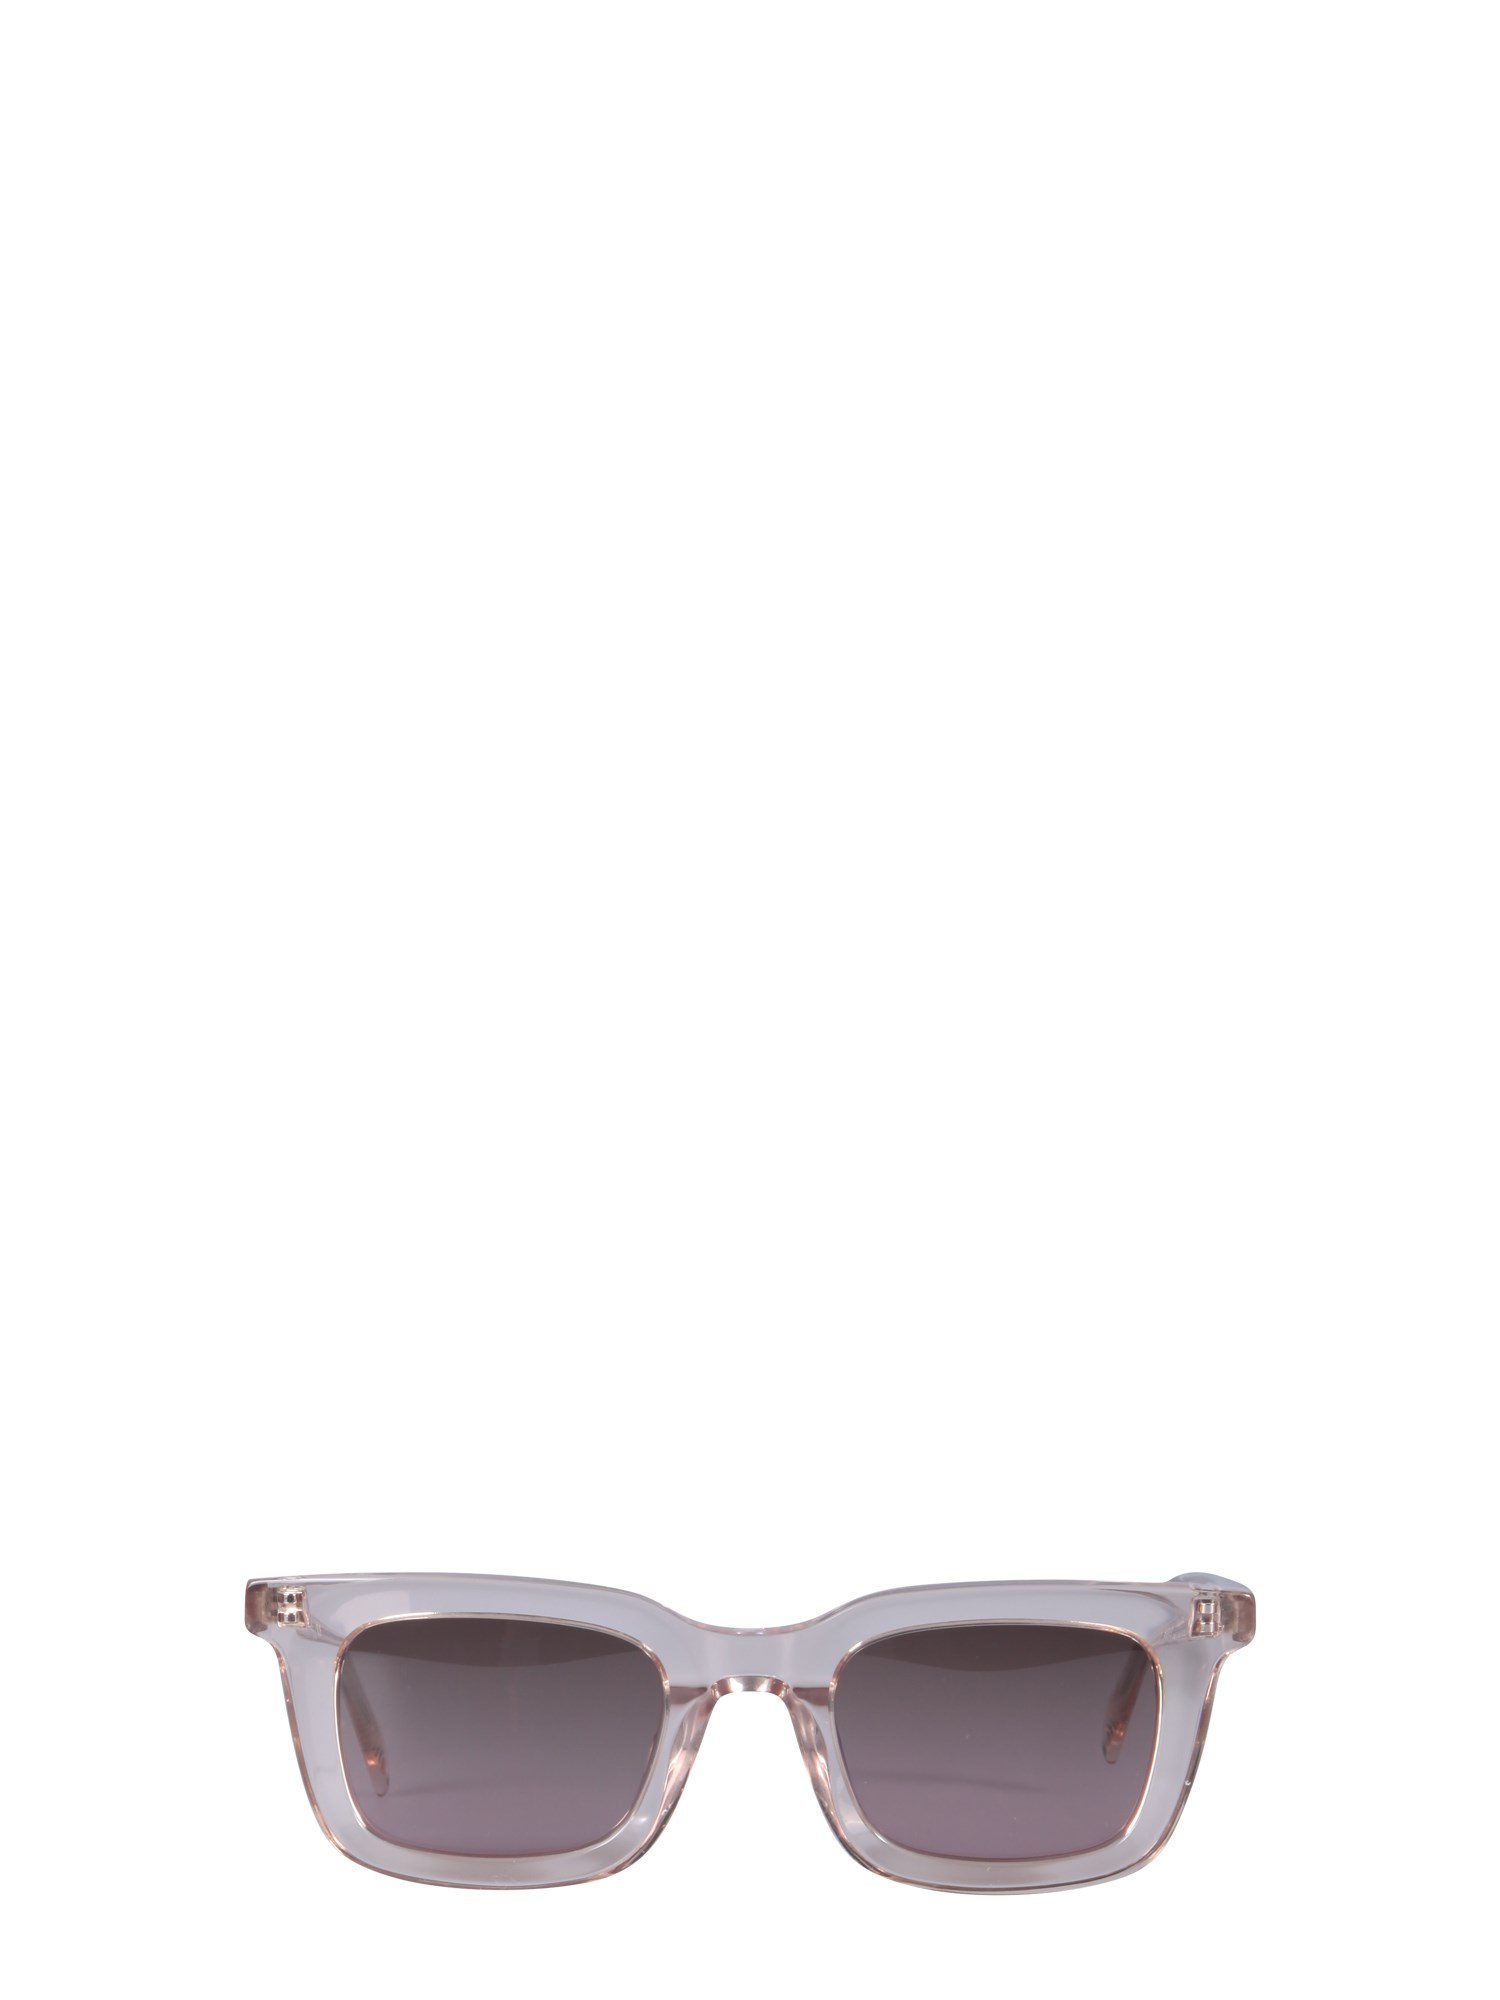 district people district people pigalle sunglasses